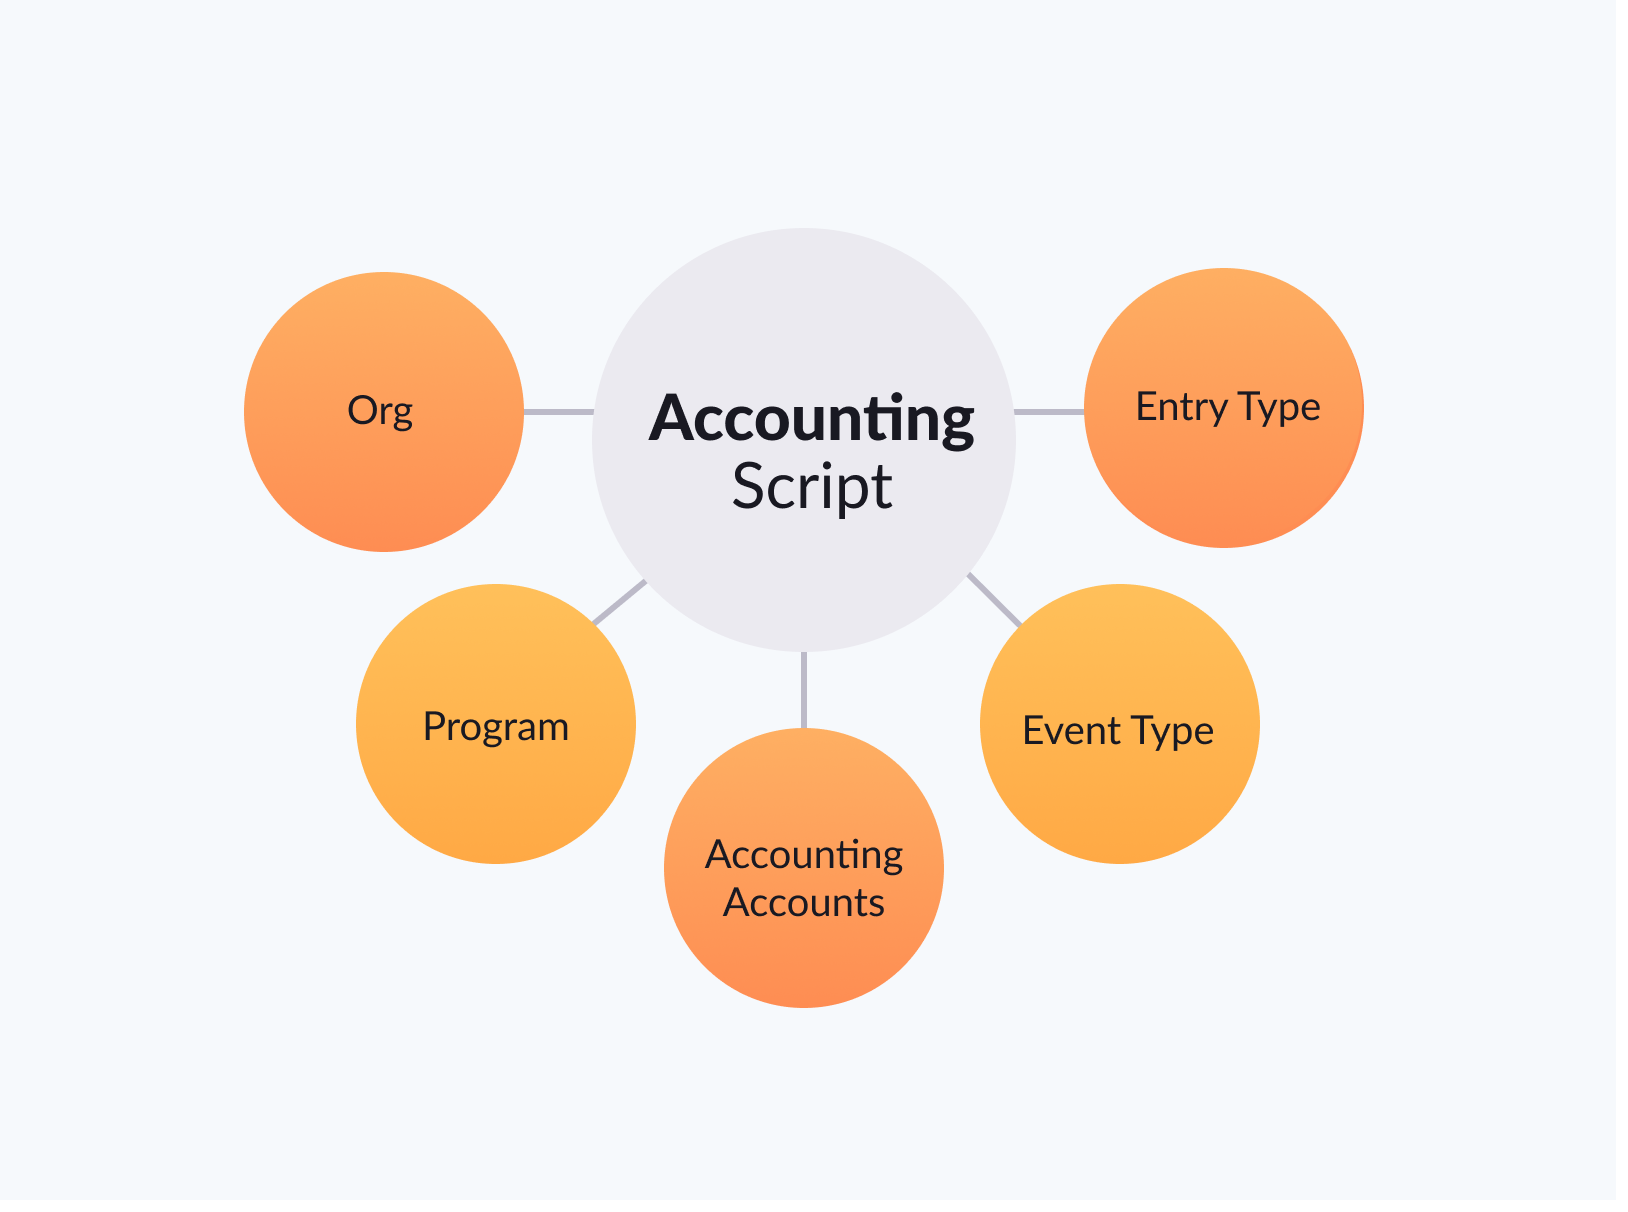 The accounting script and its elements